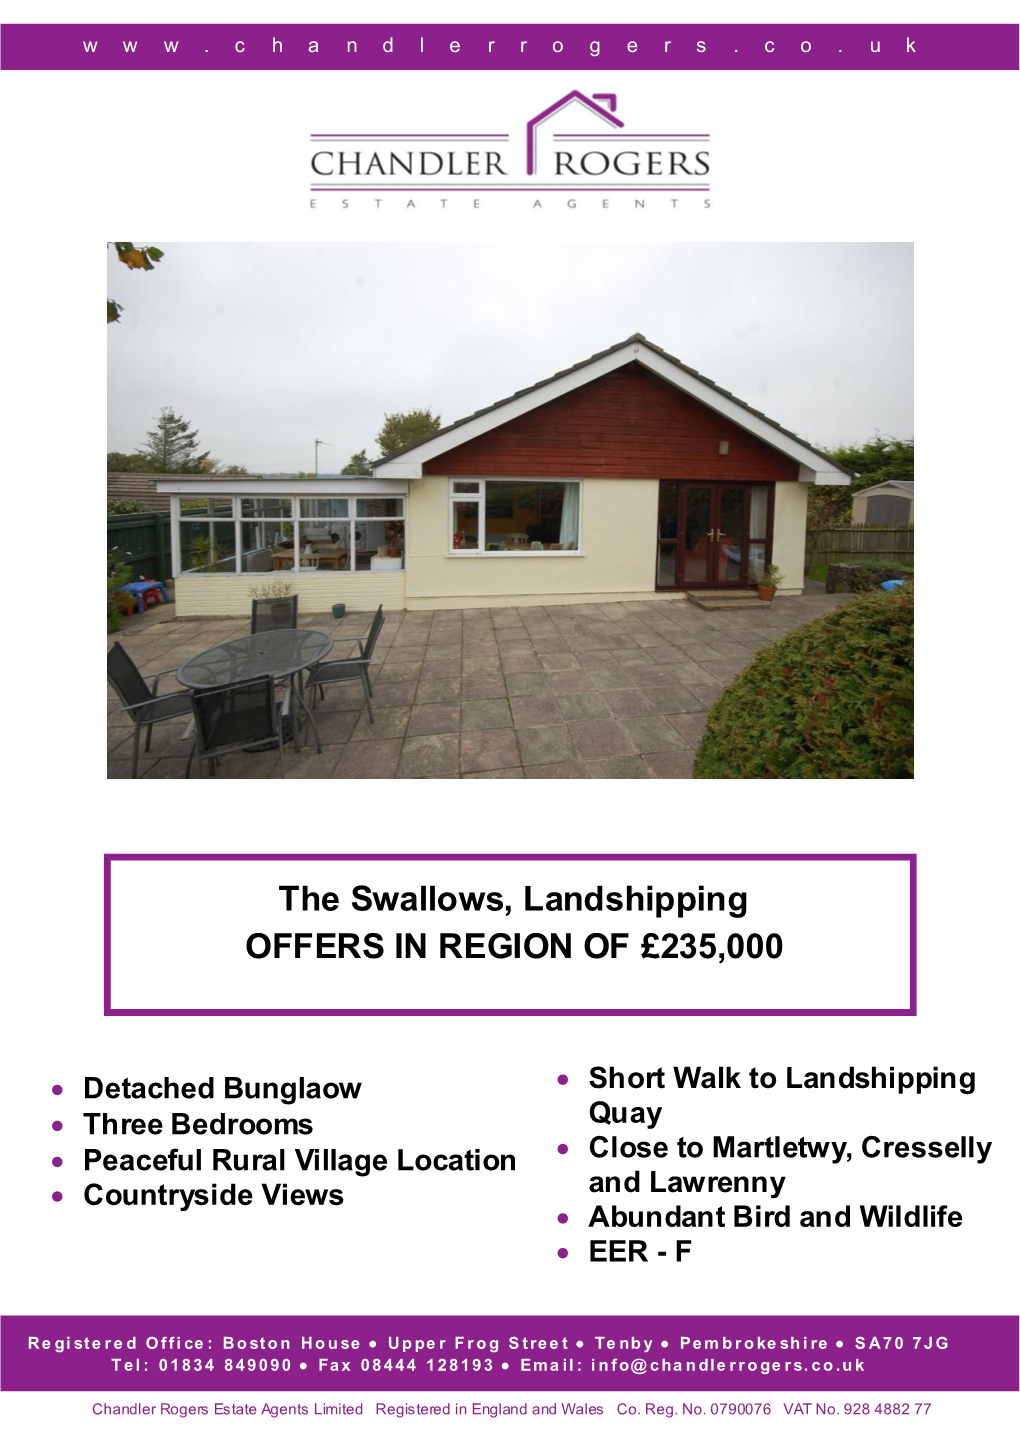 The Swallows, Landshipping OFFERS in REGION of £235,000